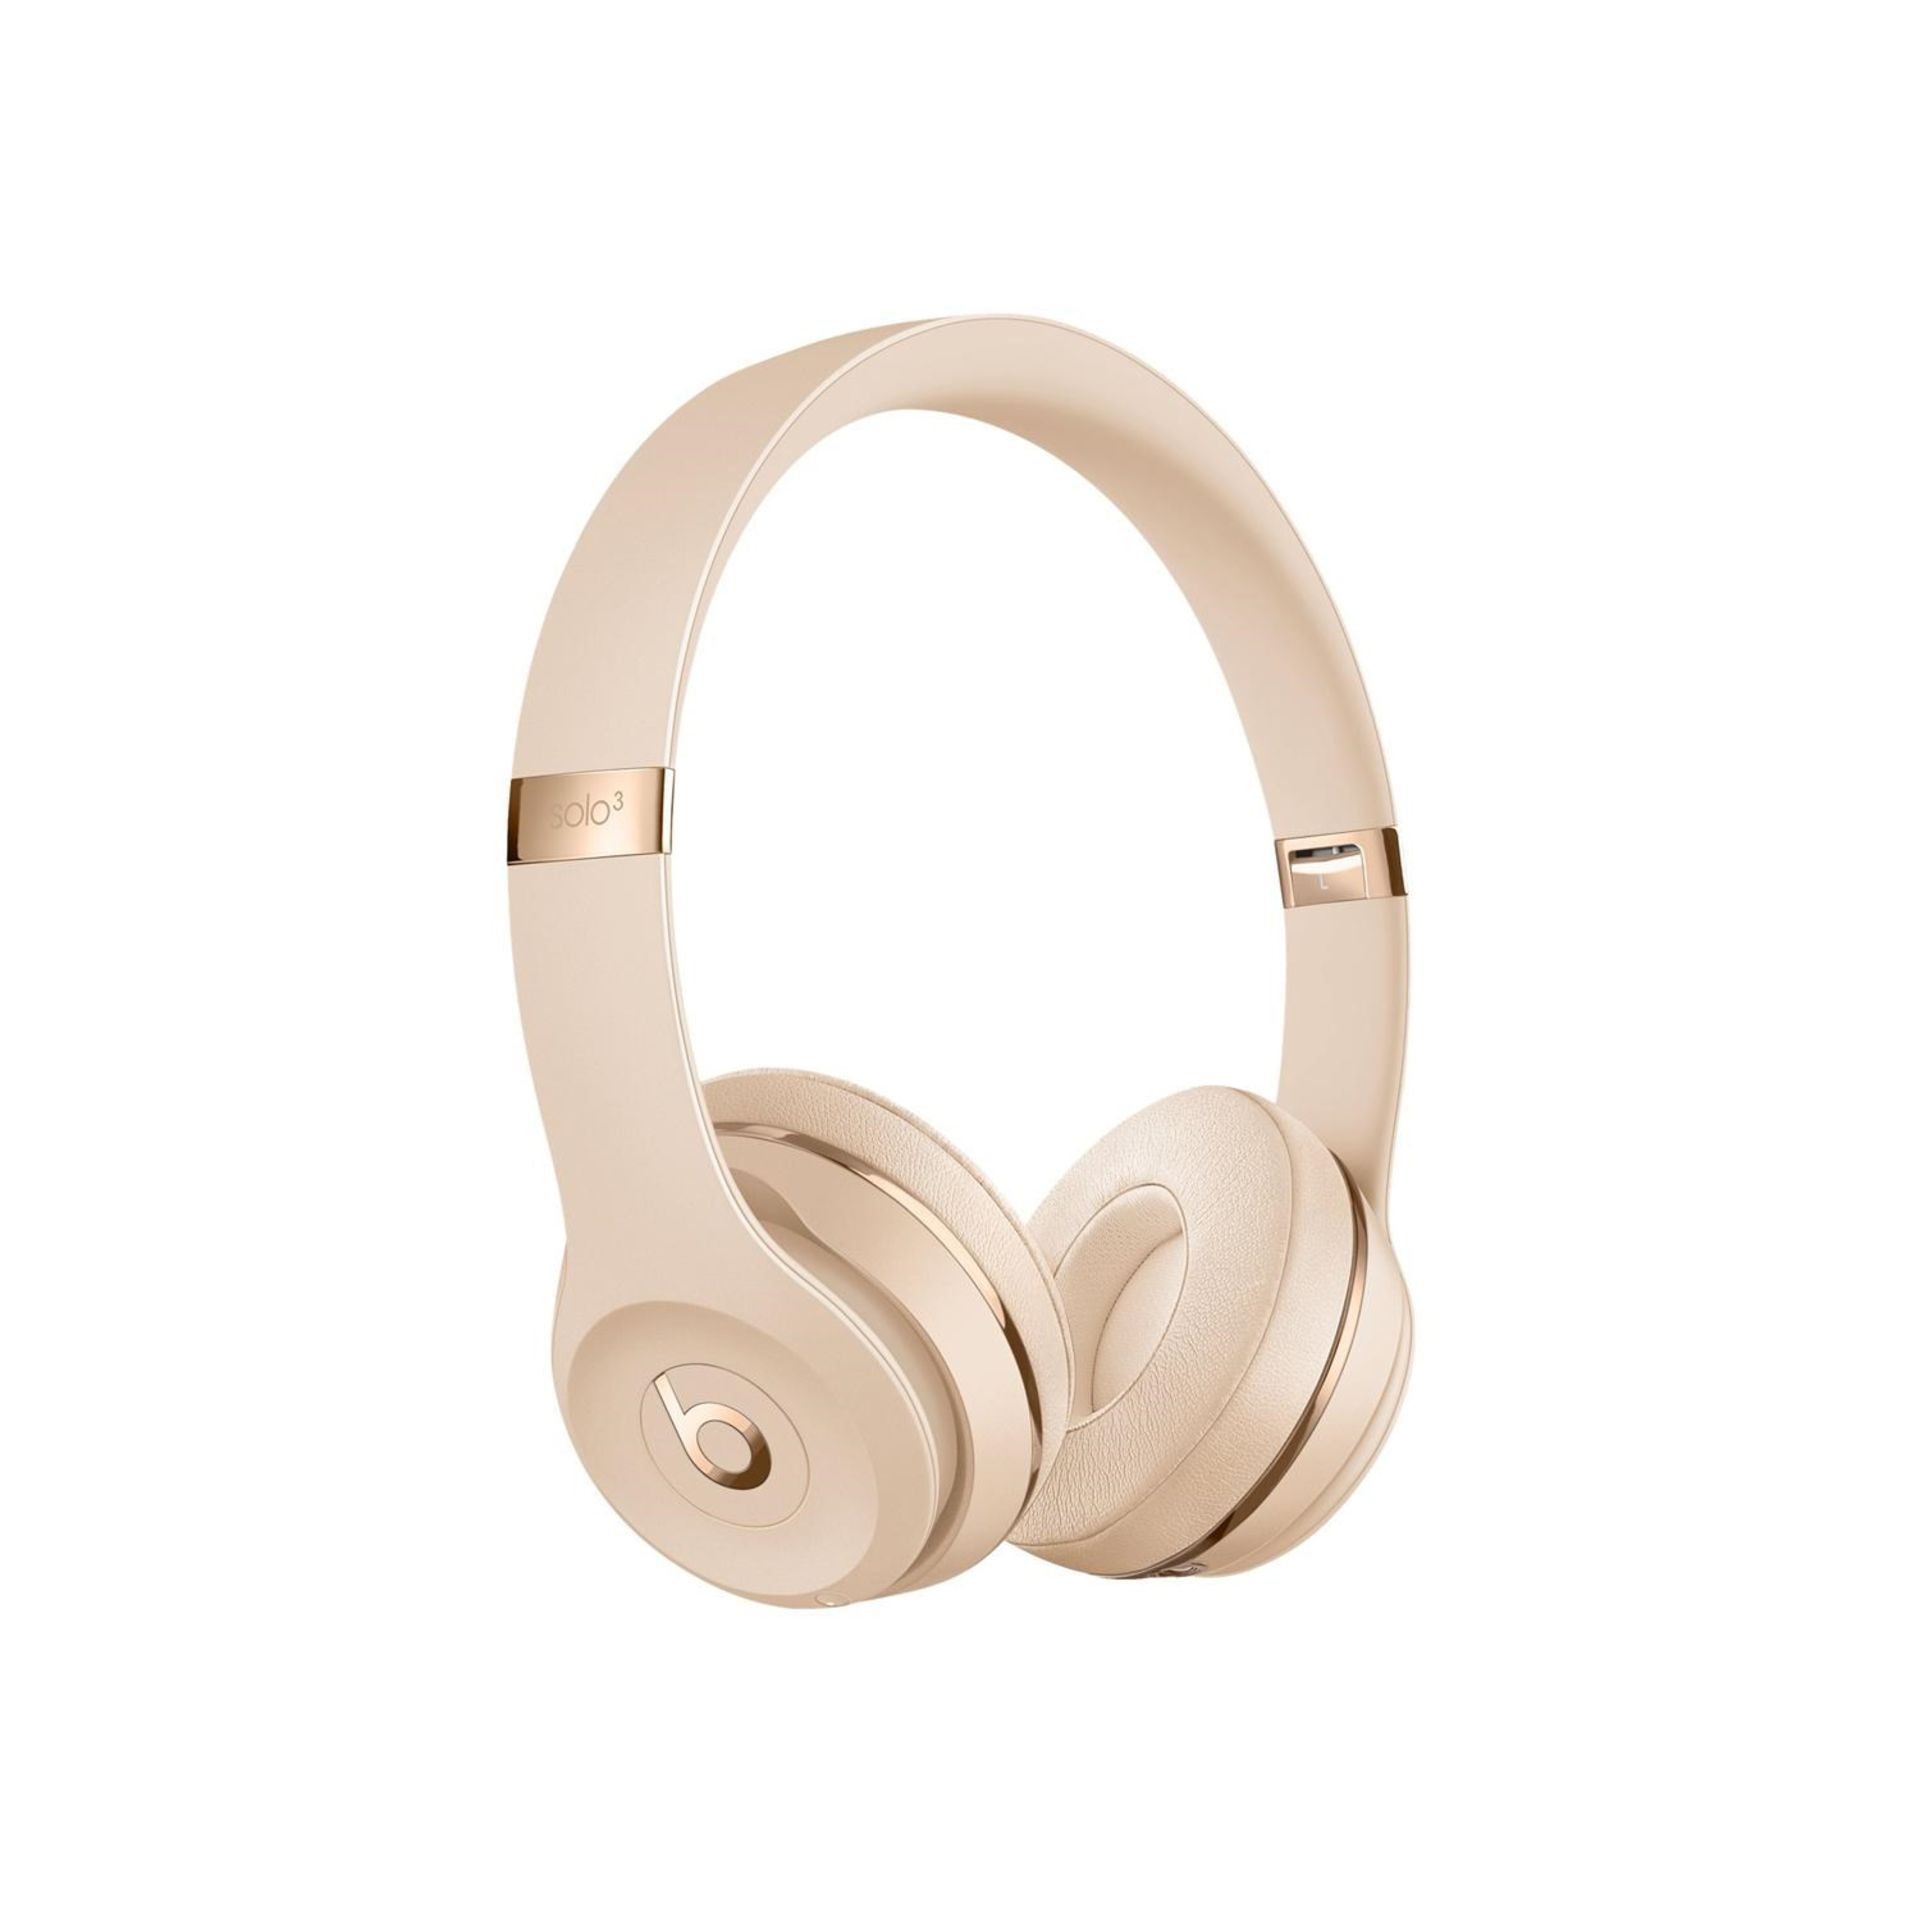 + VAT Brand New Beats Solo 3 Wireless Bluetooth Headphones Satin Gold - Wireless Connect To Your